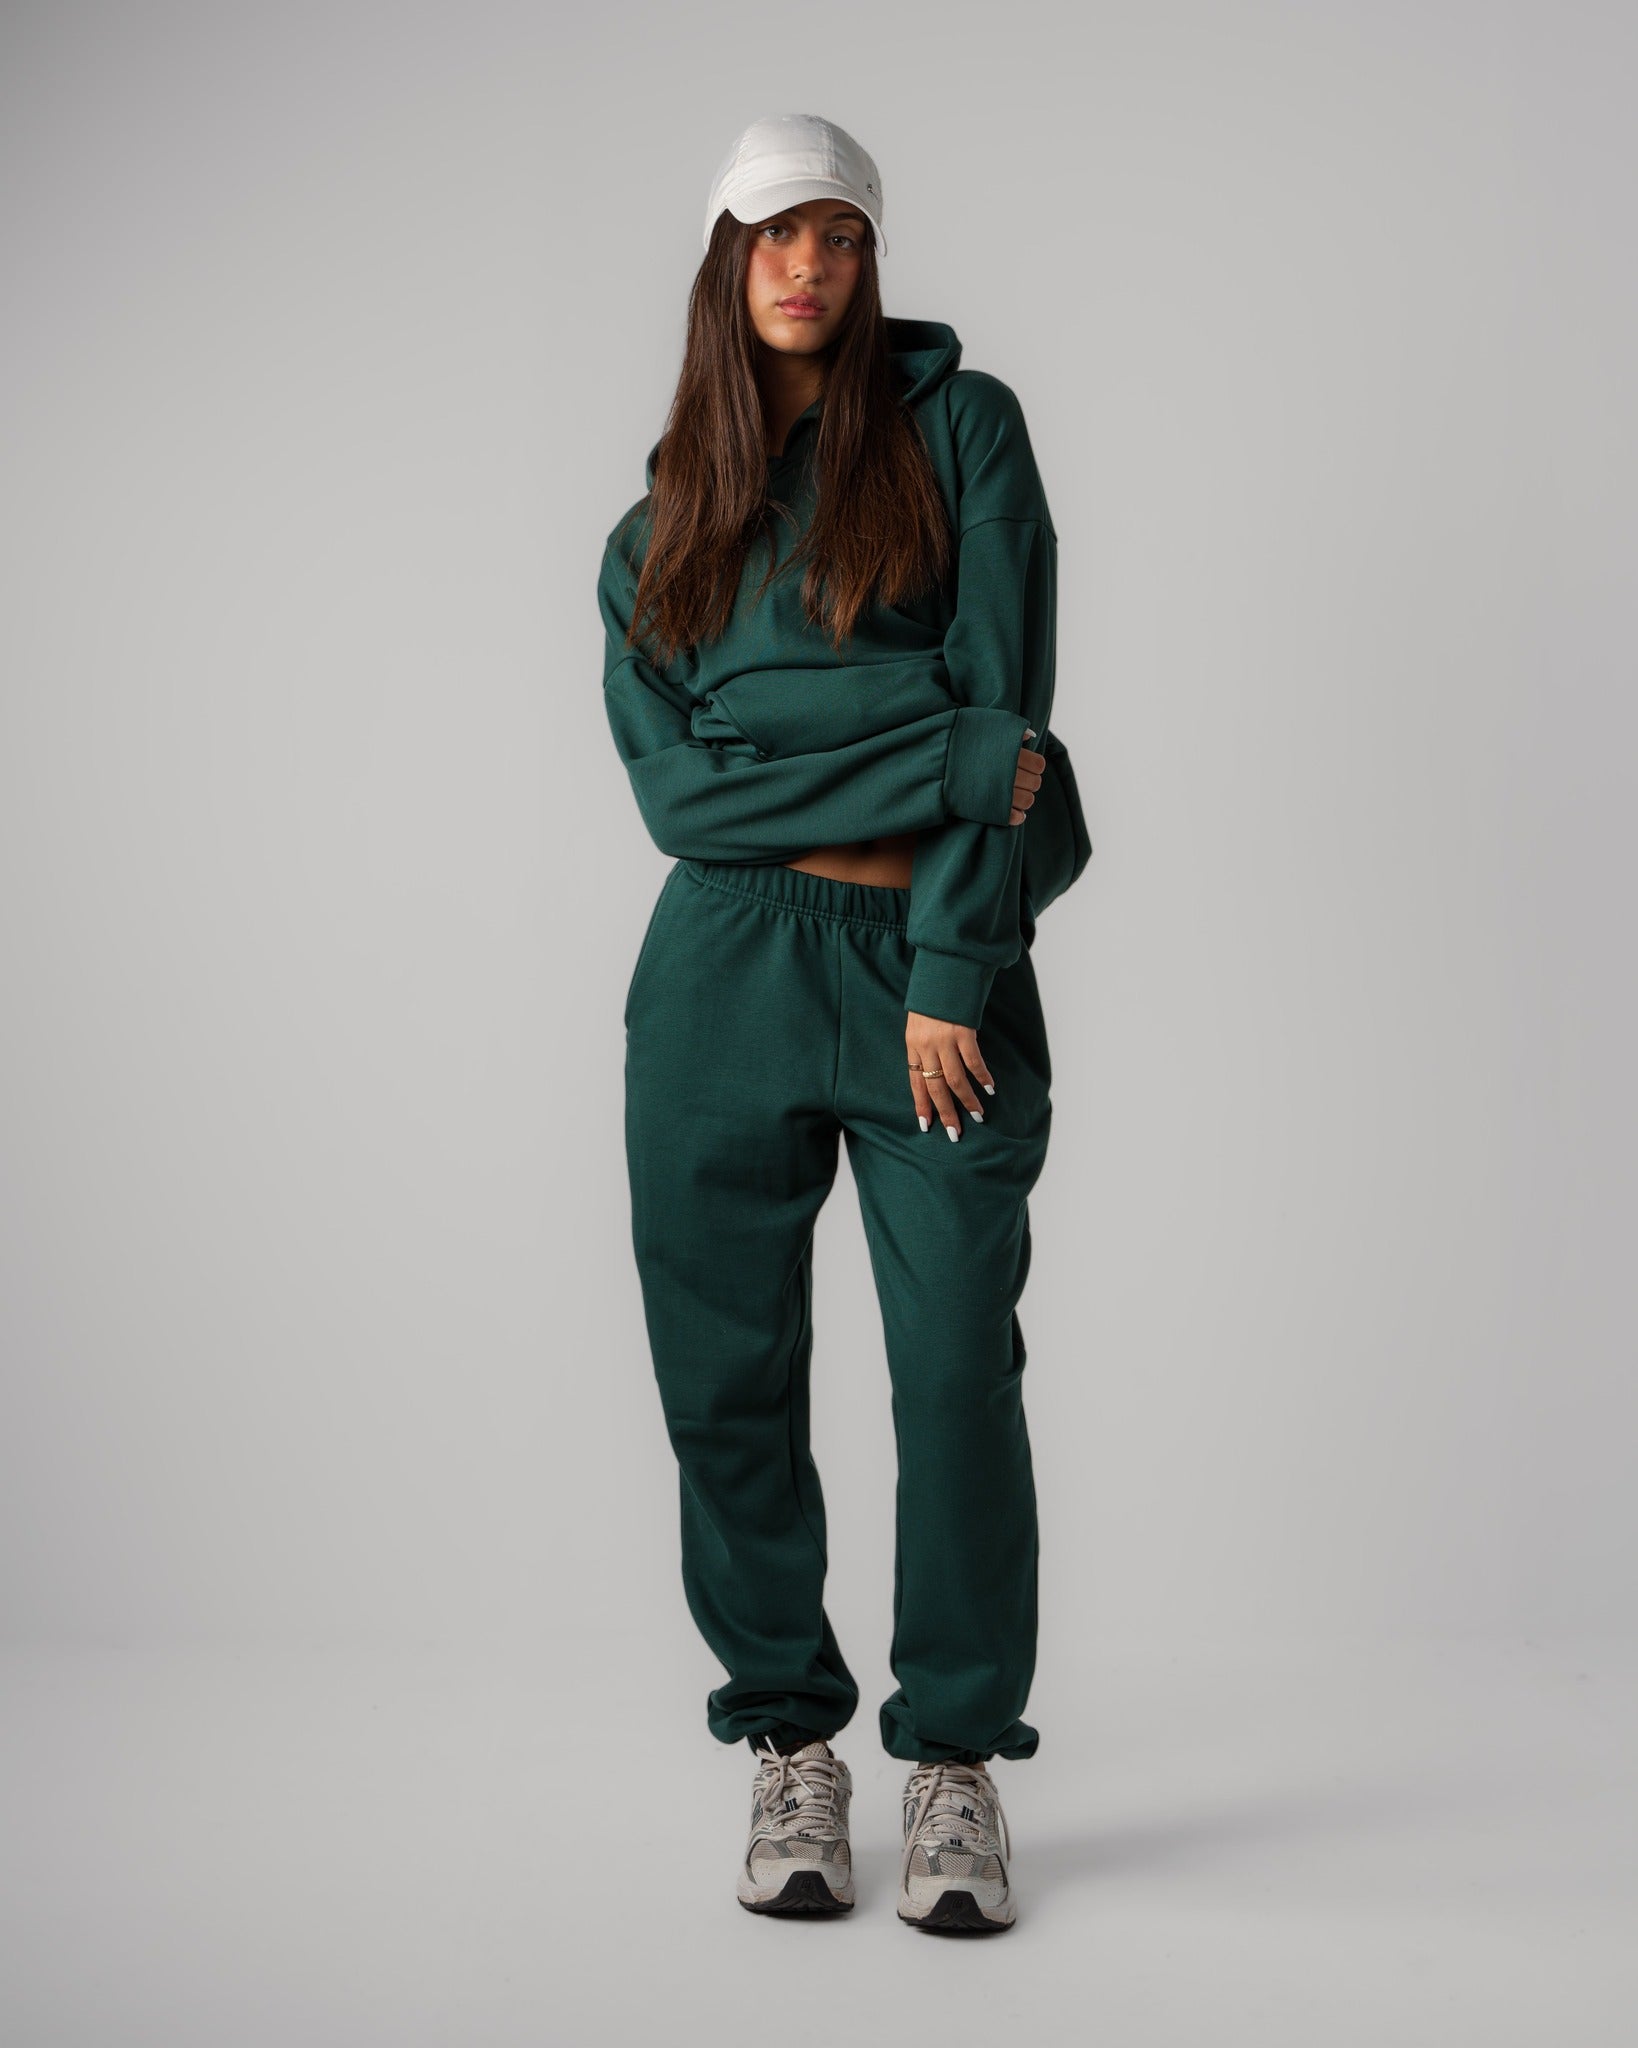 Matching set of green Hoodie and Cuffed Jogger frontview